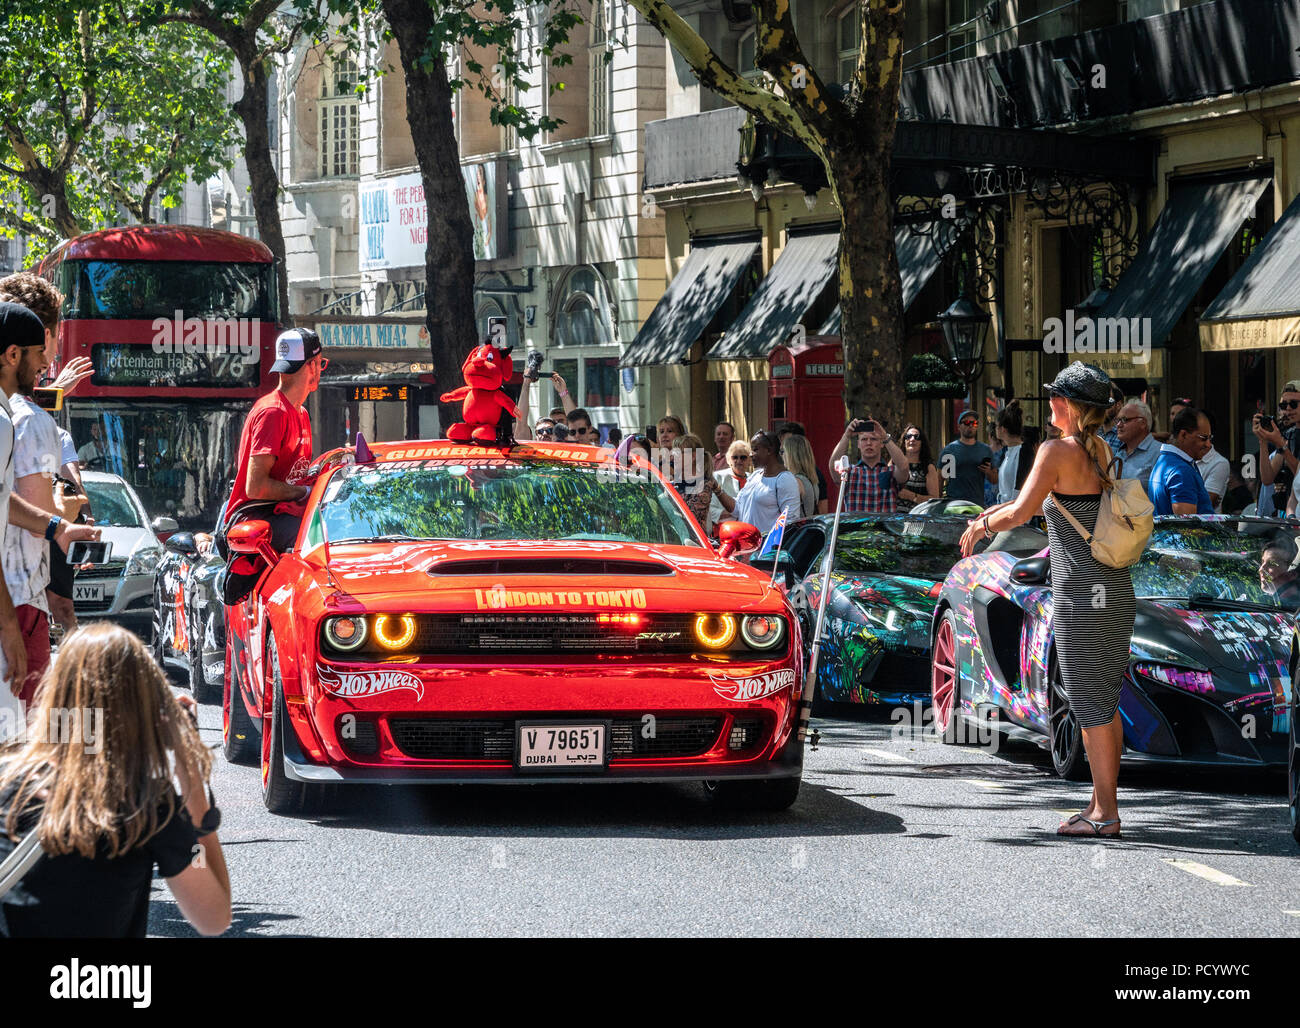 5 Aug 2018 - London, UK. Powerful red American Muscle, Dodge Challenger SRT Demon with Dubai license plates at Gumball Rally 3000 event. Stock Photo